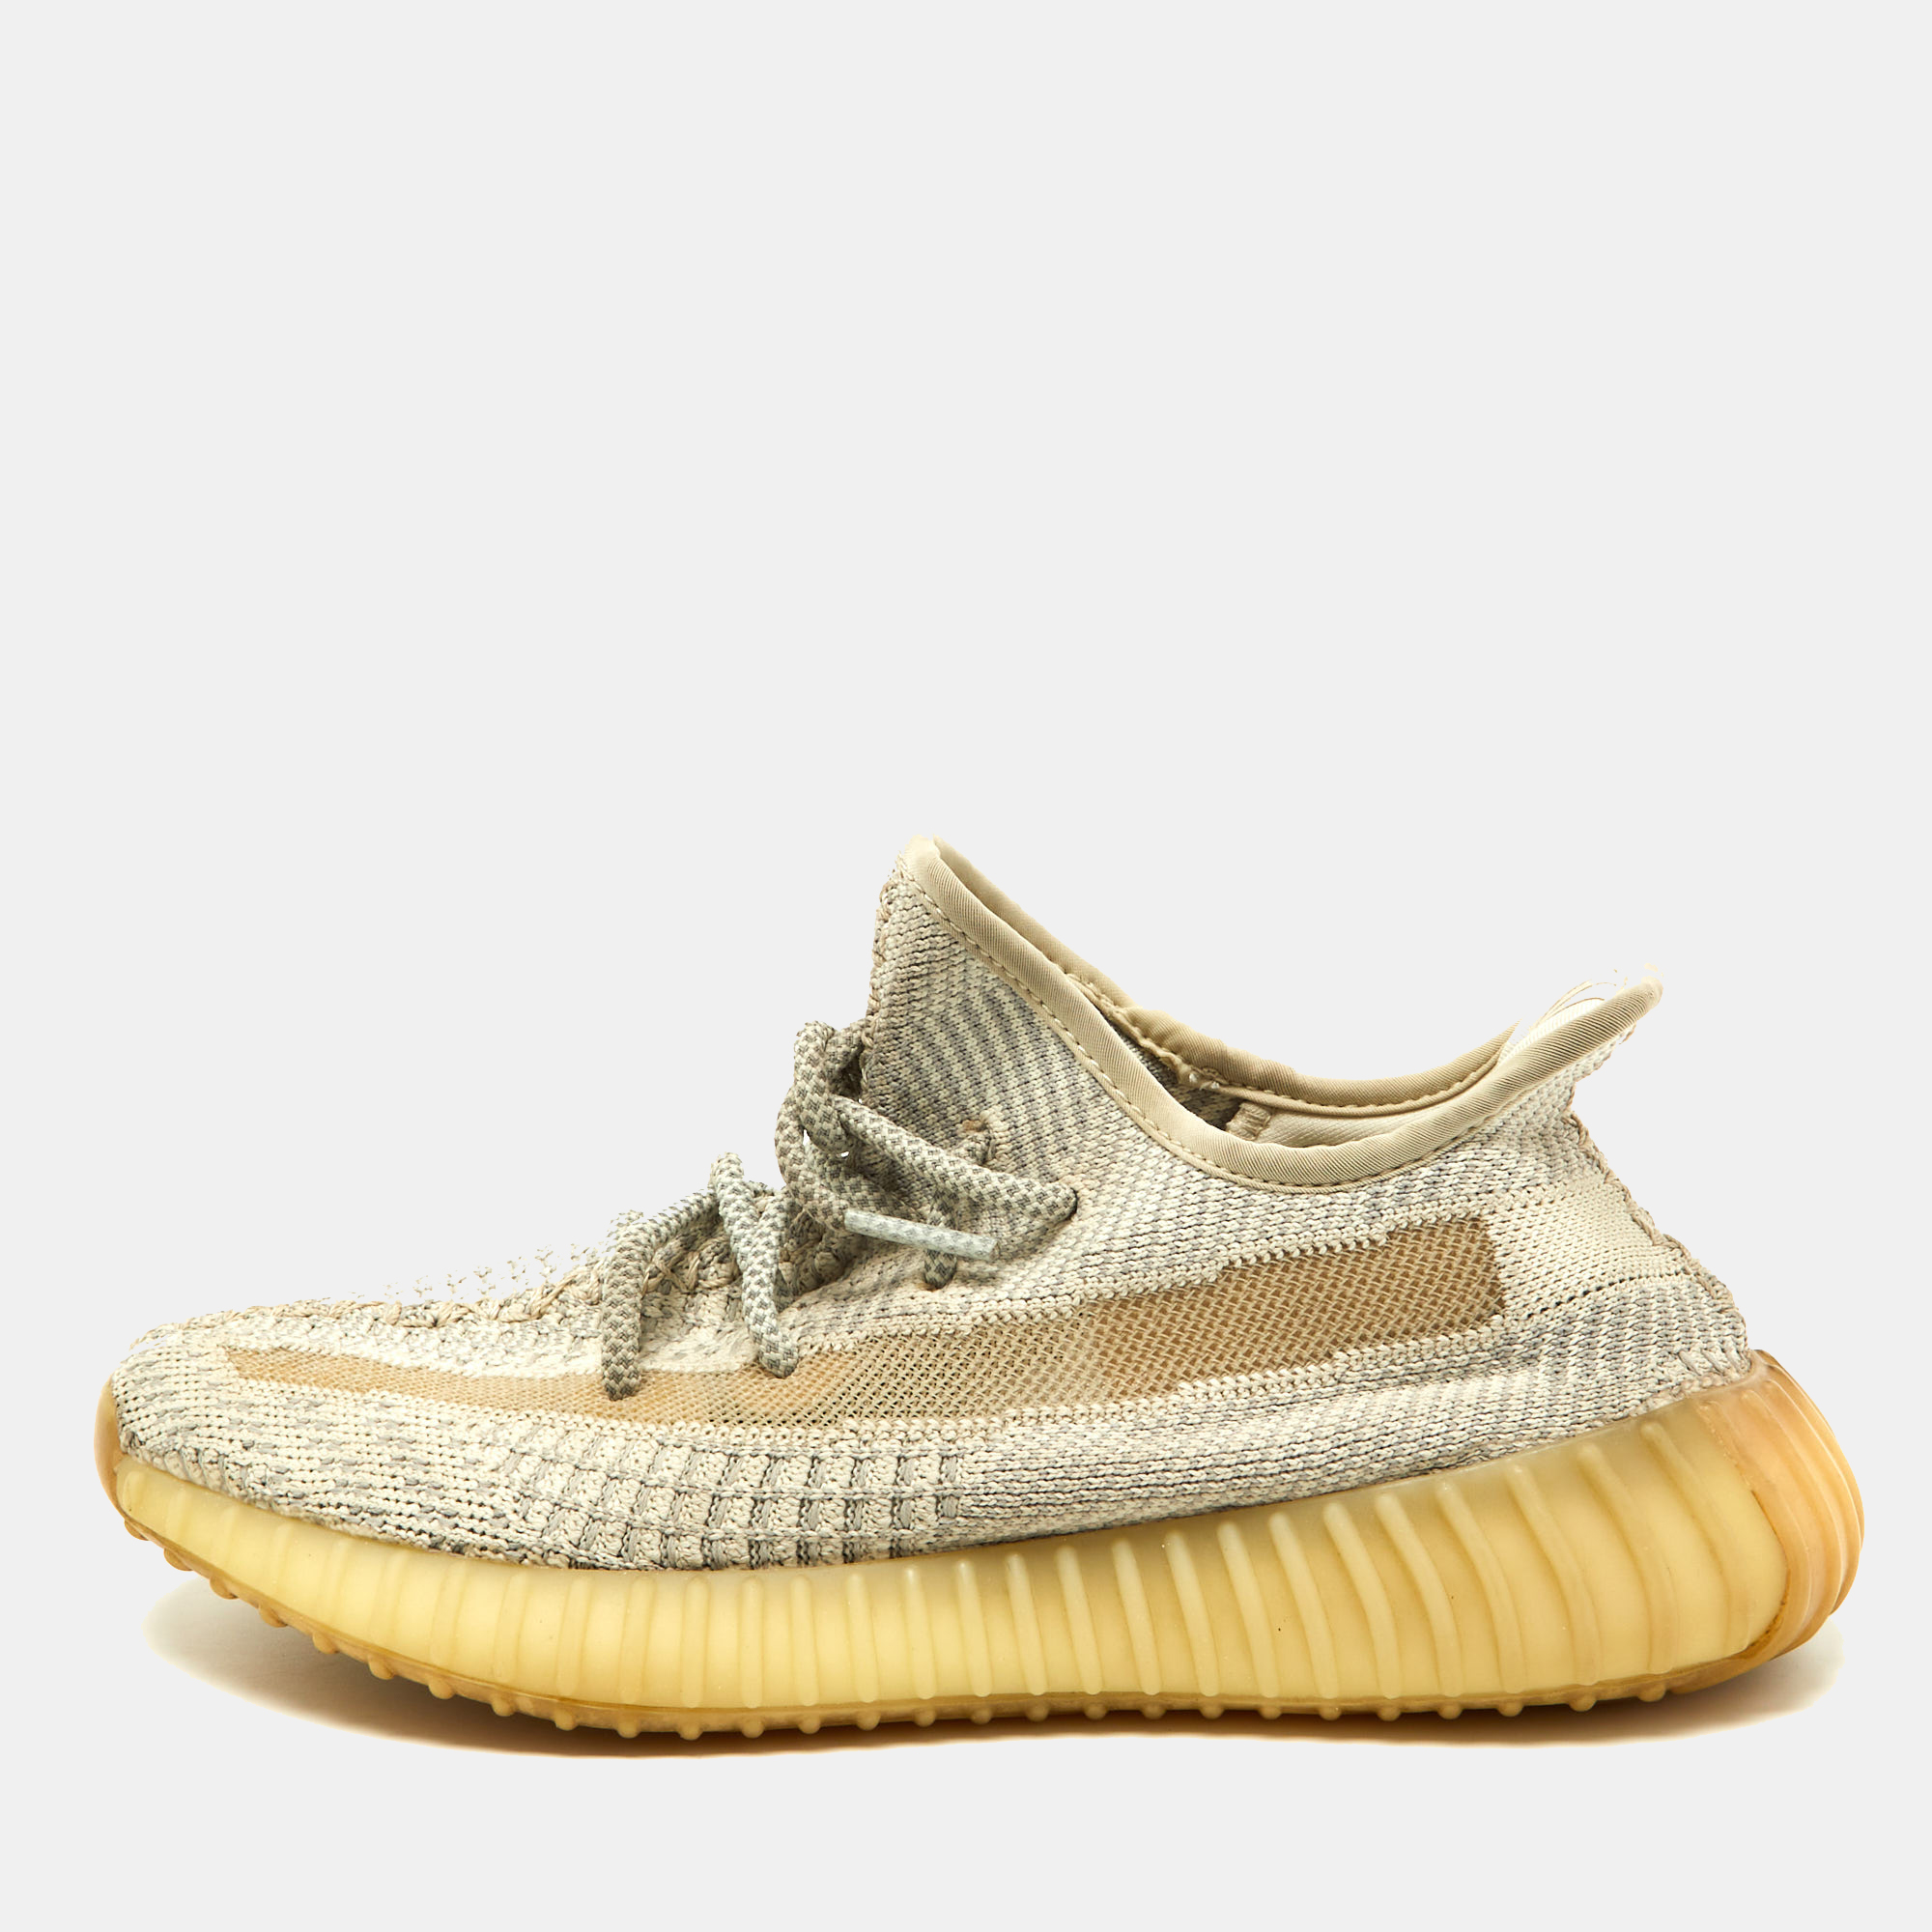 Pre-owned Yeezy X Adidas Boost 350 V2 Lundmark Non-reflective Trainers Size 38 In Beige